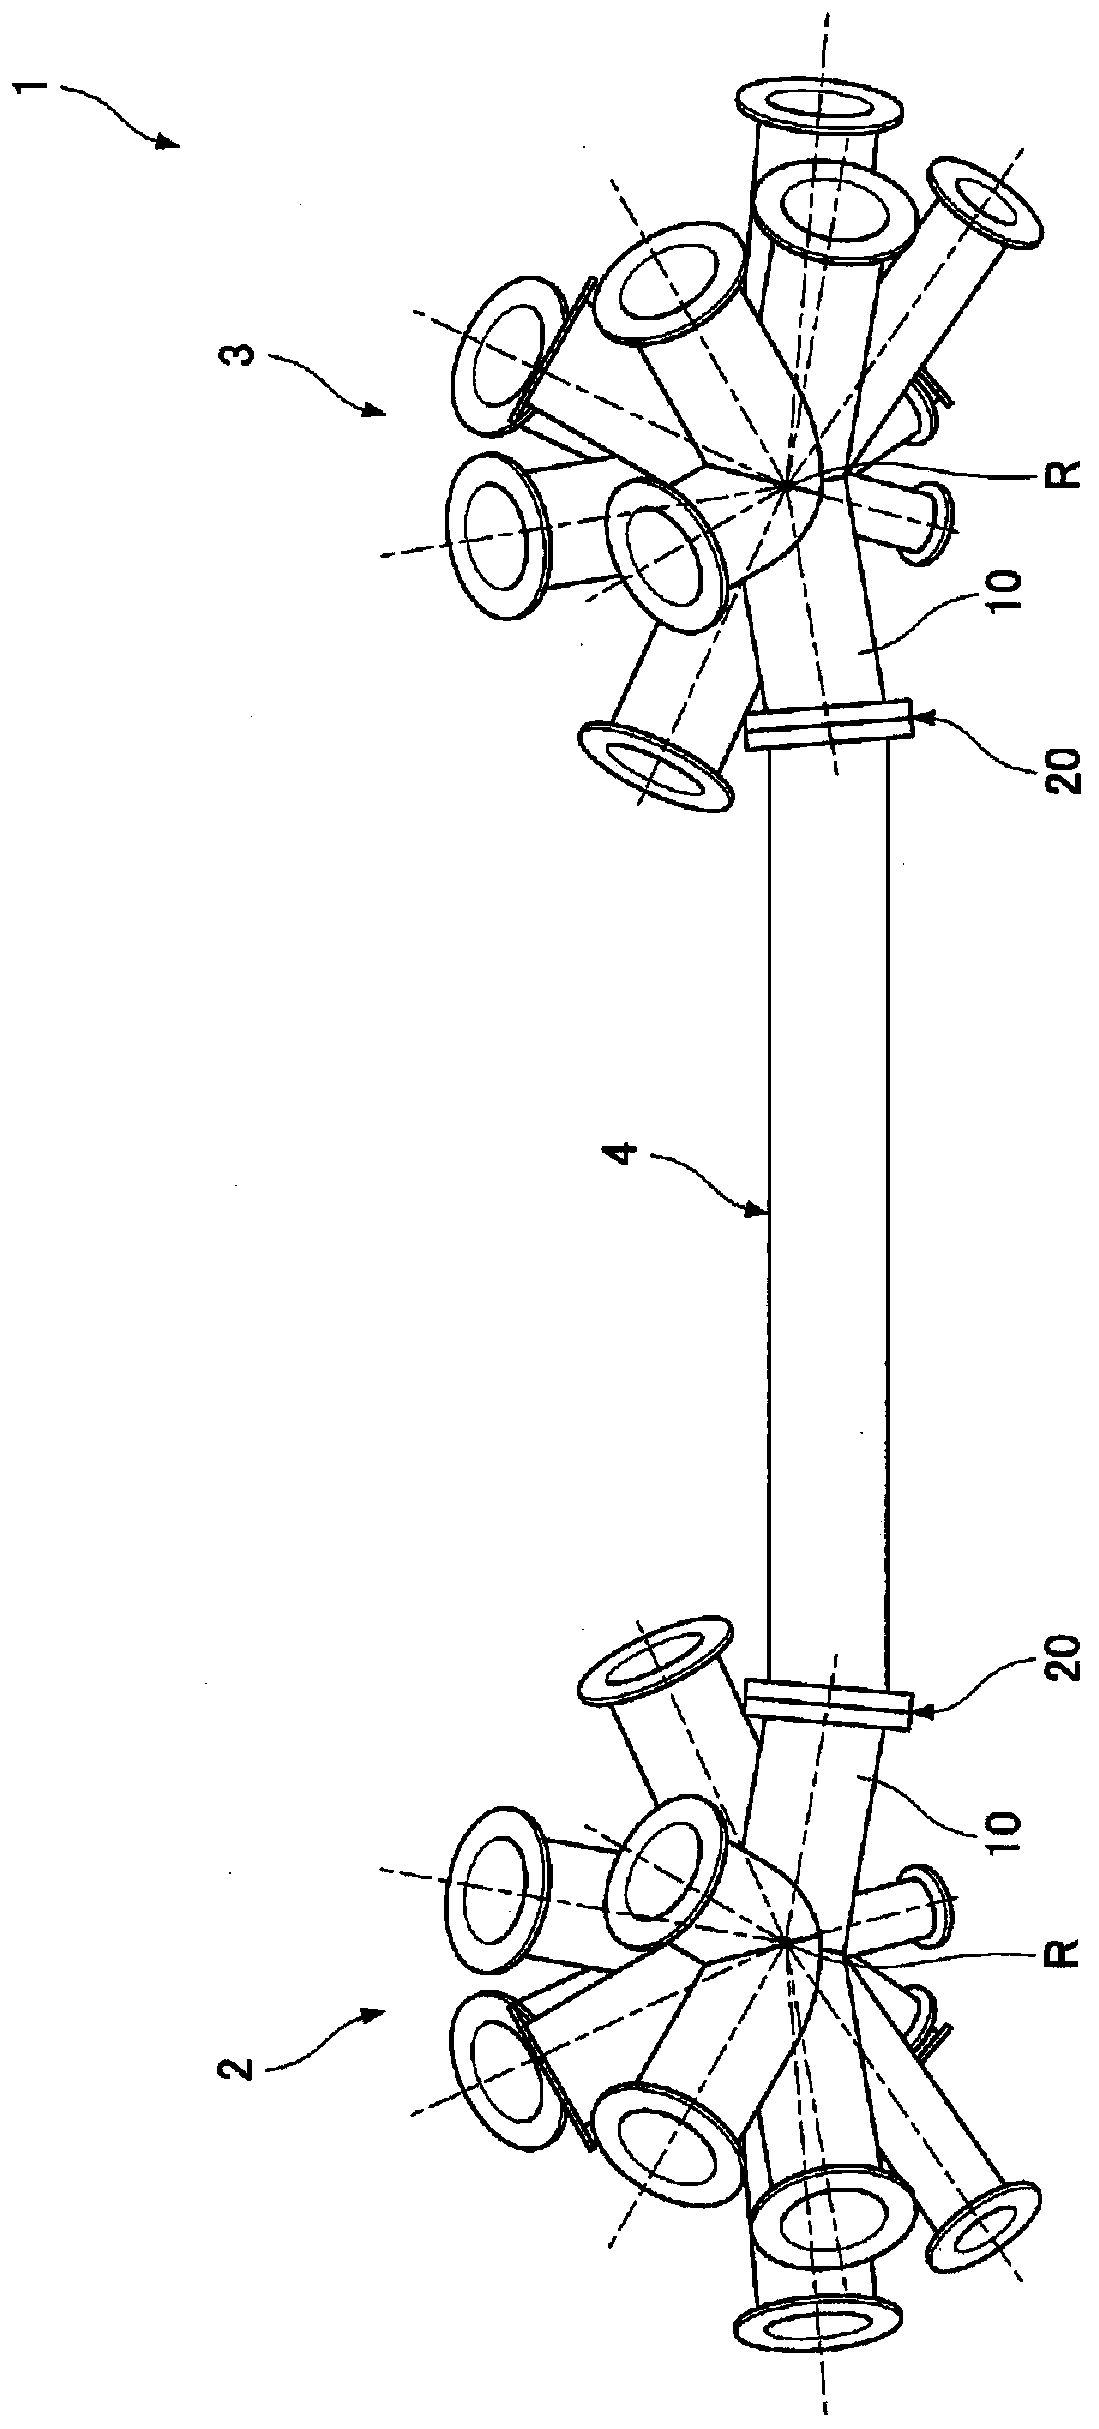 Welding method of steel pipe and joint of steel pipe structure